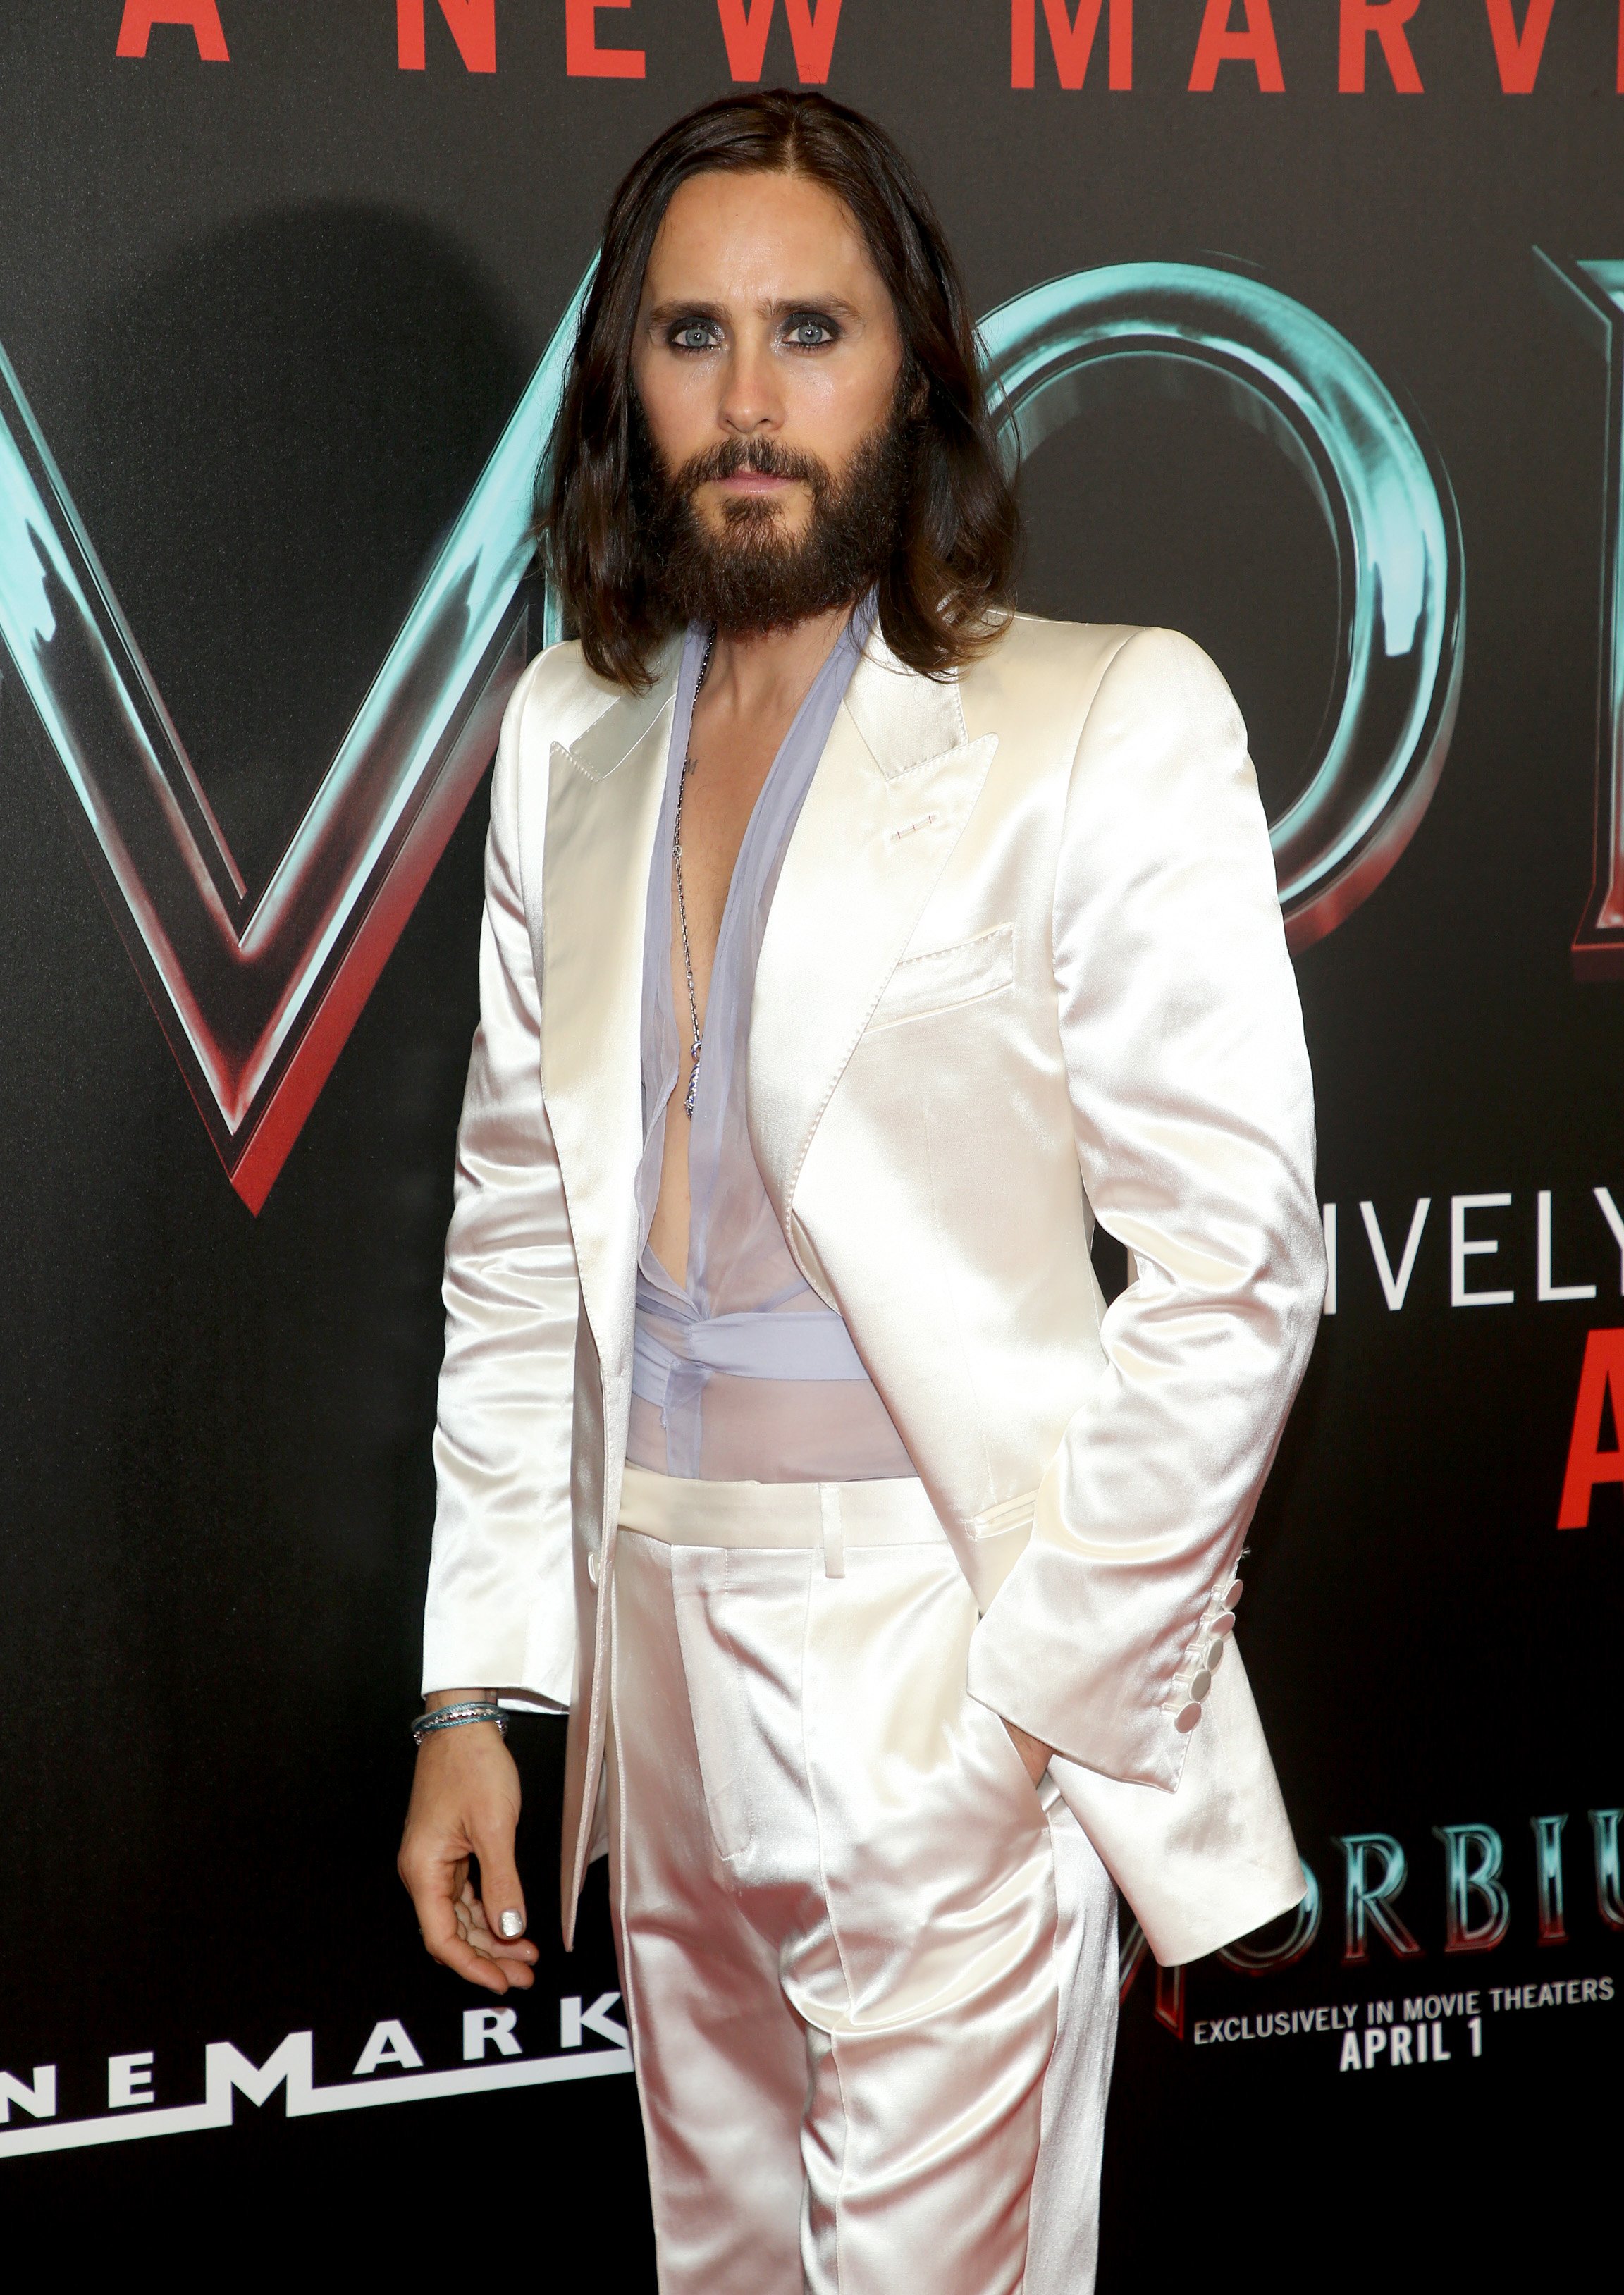 How Does Jared Leto Look So Young for His Age? Fans Can't Stop